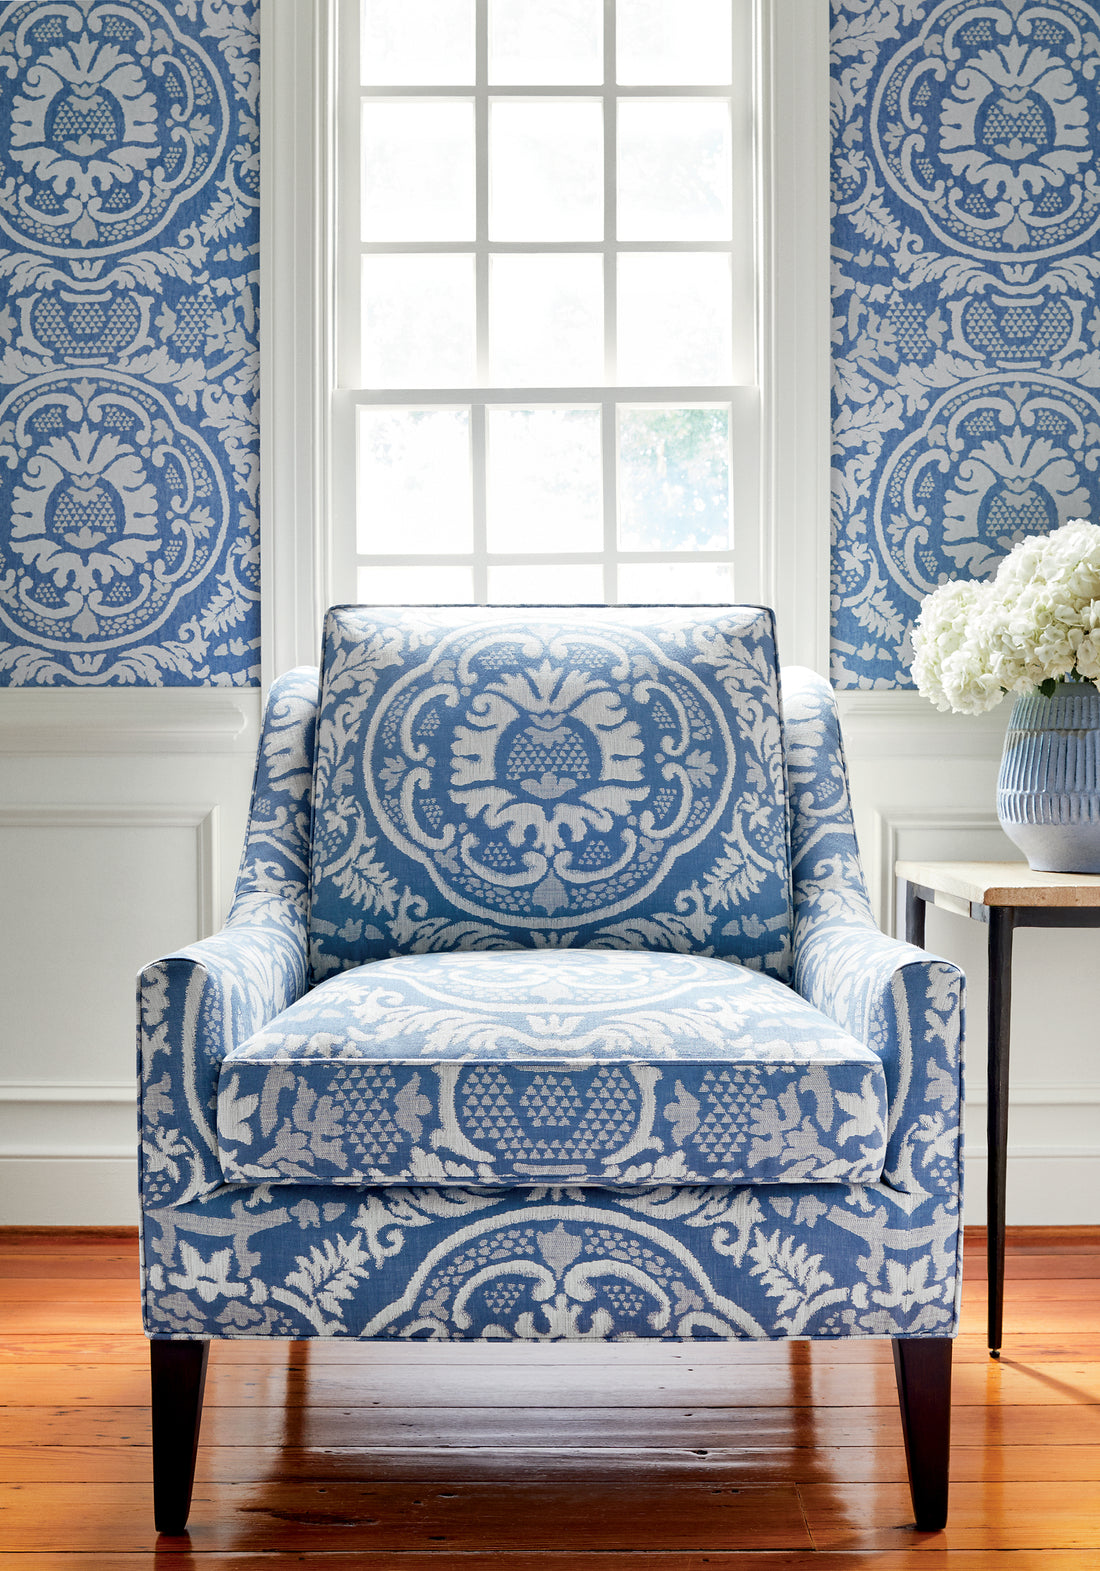 Alexander Chair in Earl Damask woven fabric in blue color - pattern number W710837 by Thibaut in the Heritage collection